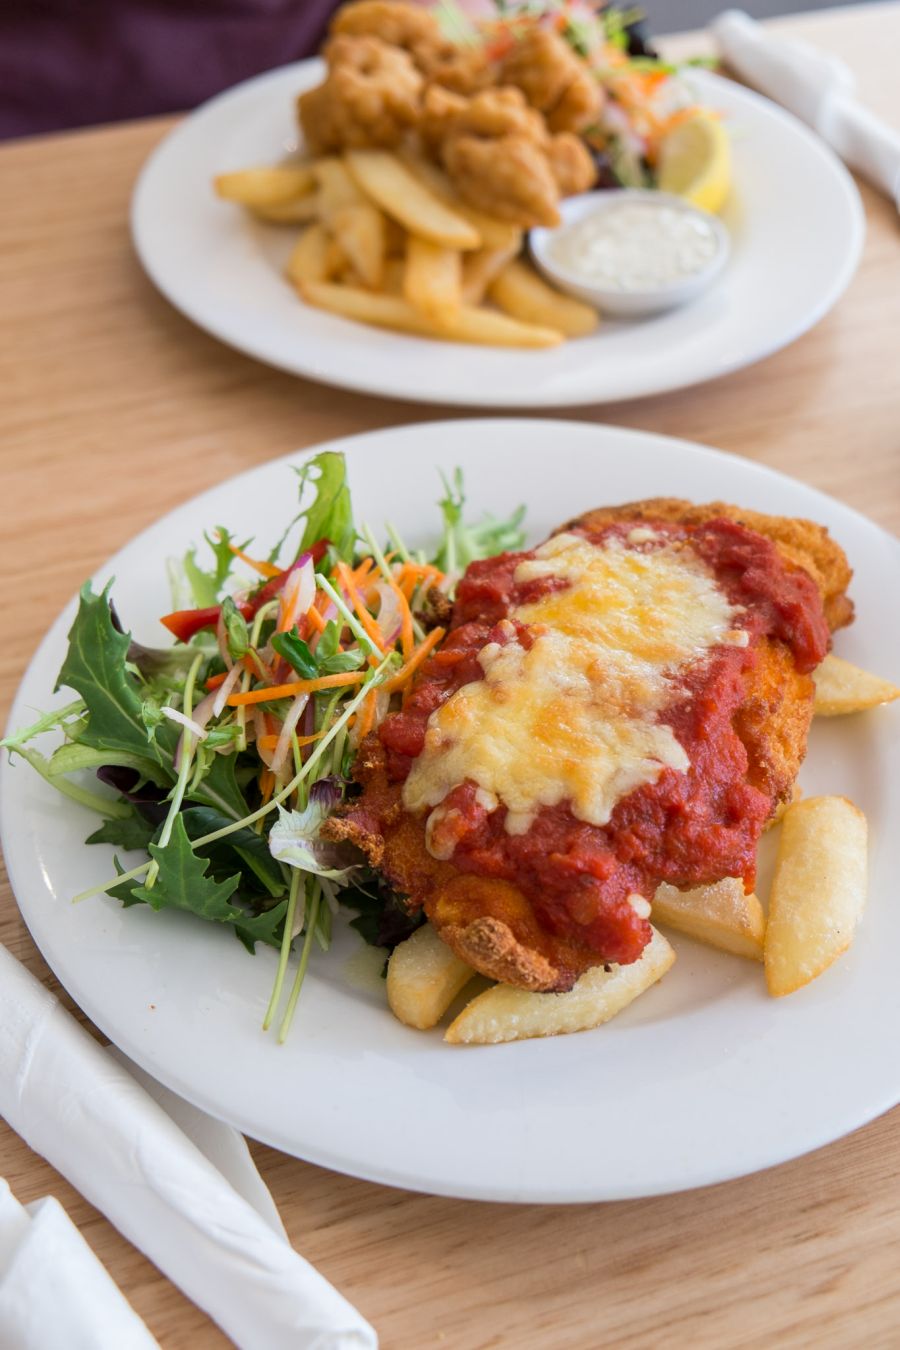 Chicken parmigiana with chunky chips and salad (AU$15 - tour menu)